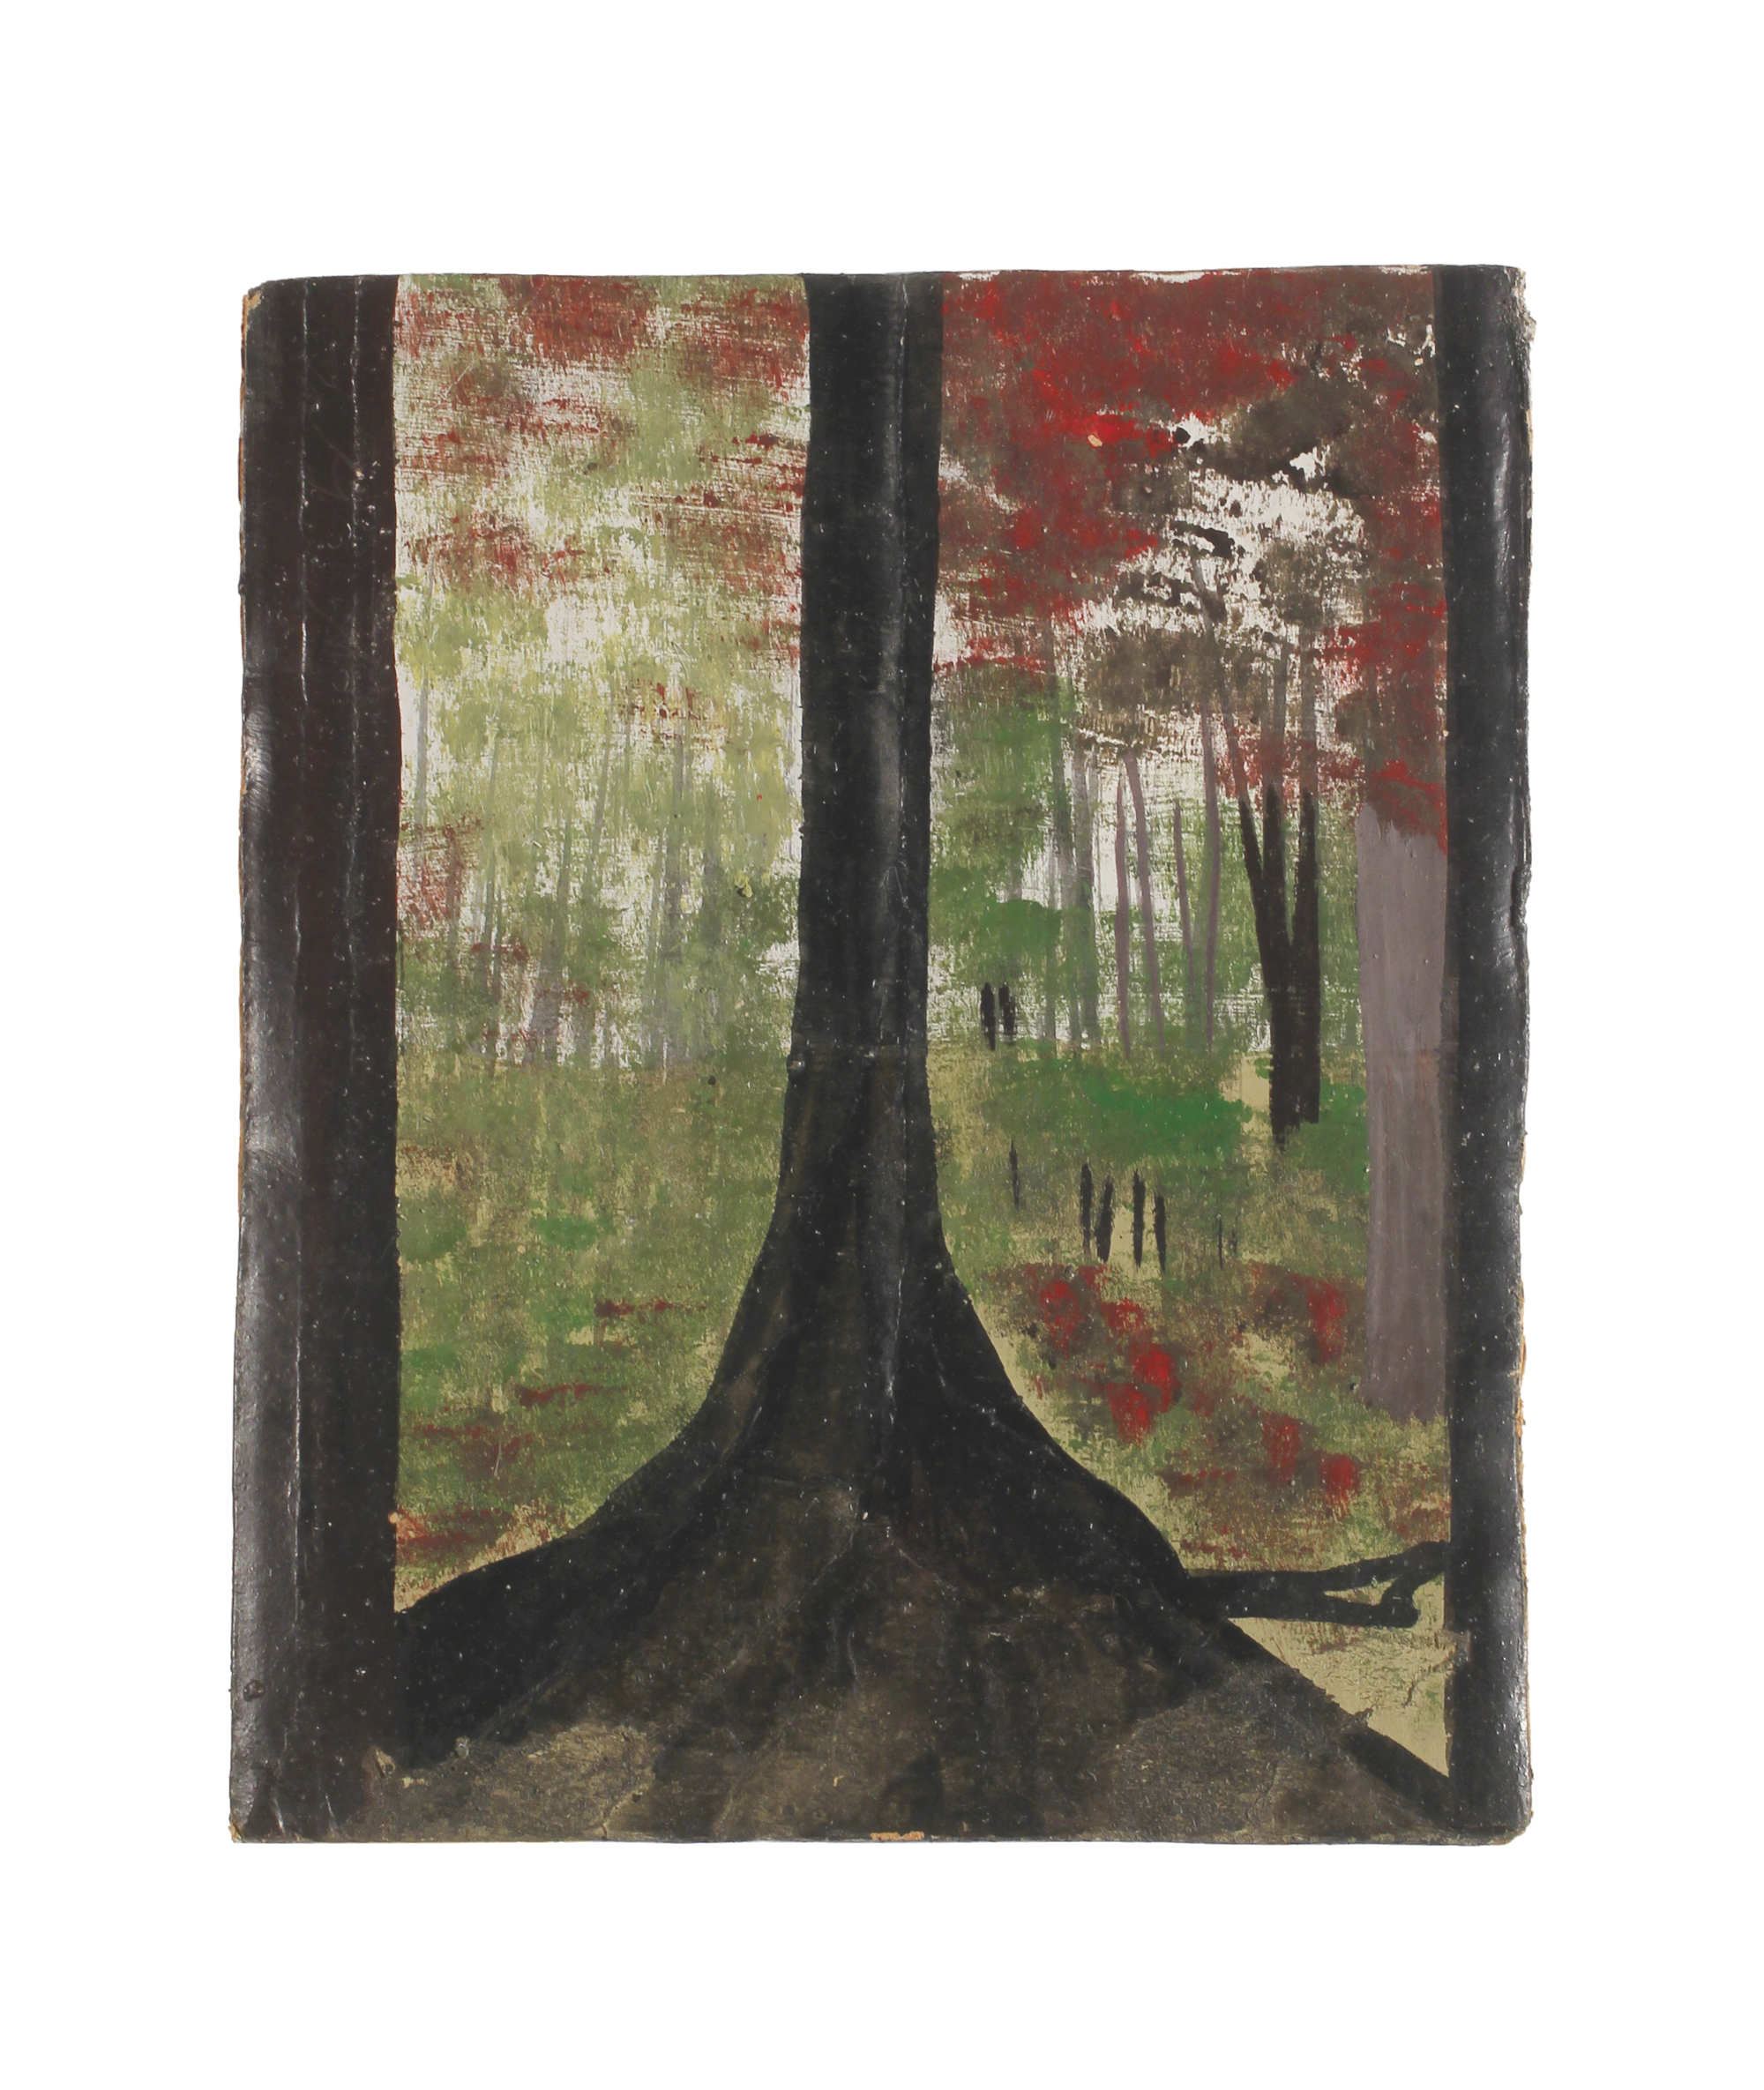 A painting of a tree trunk in the woods, with a smattering of reddish leaves falling from the top of the frame.